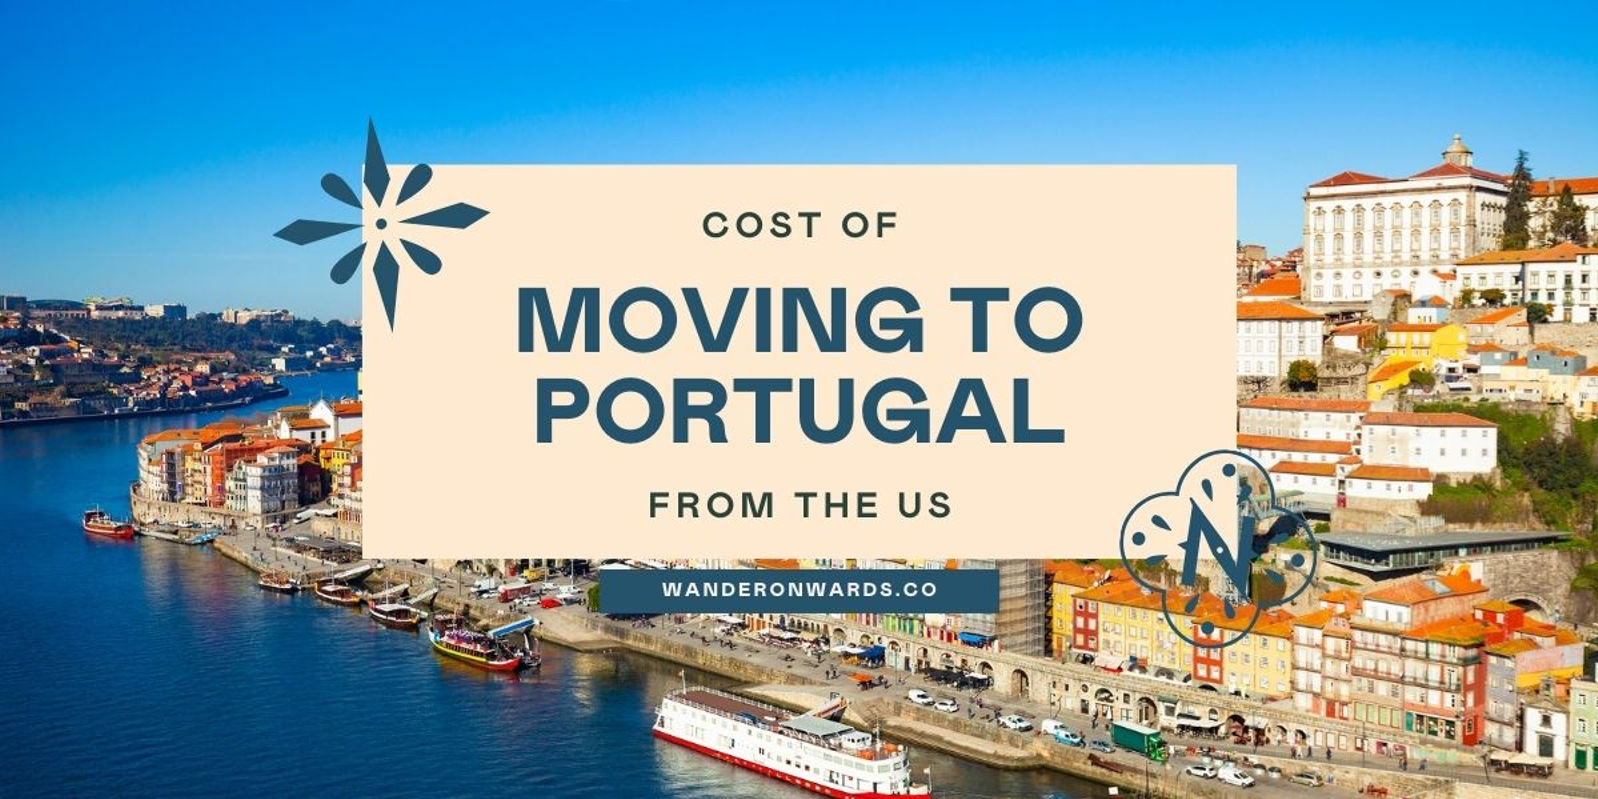 text says "Cost of Moving to Portugal from the US"